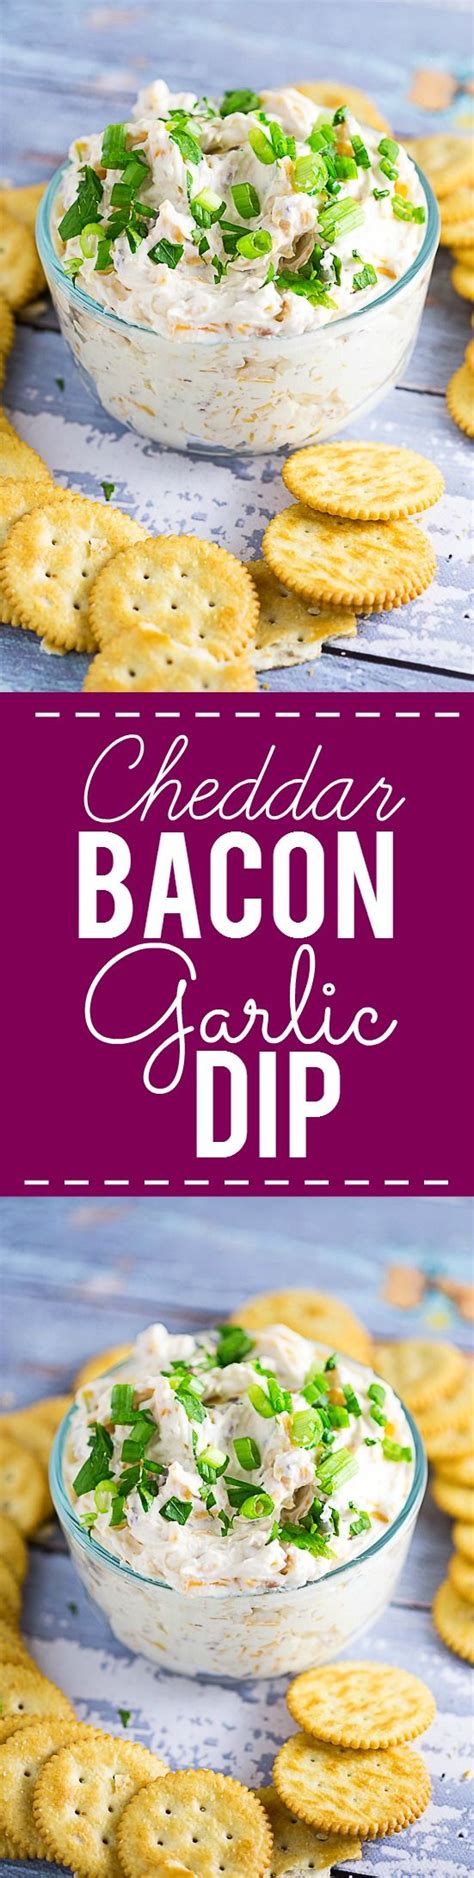 Cheddar Bacon Garlic Dip Recipe - Three favorite flavors come together in this simple but ...